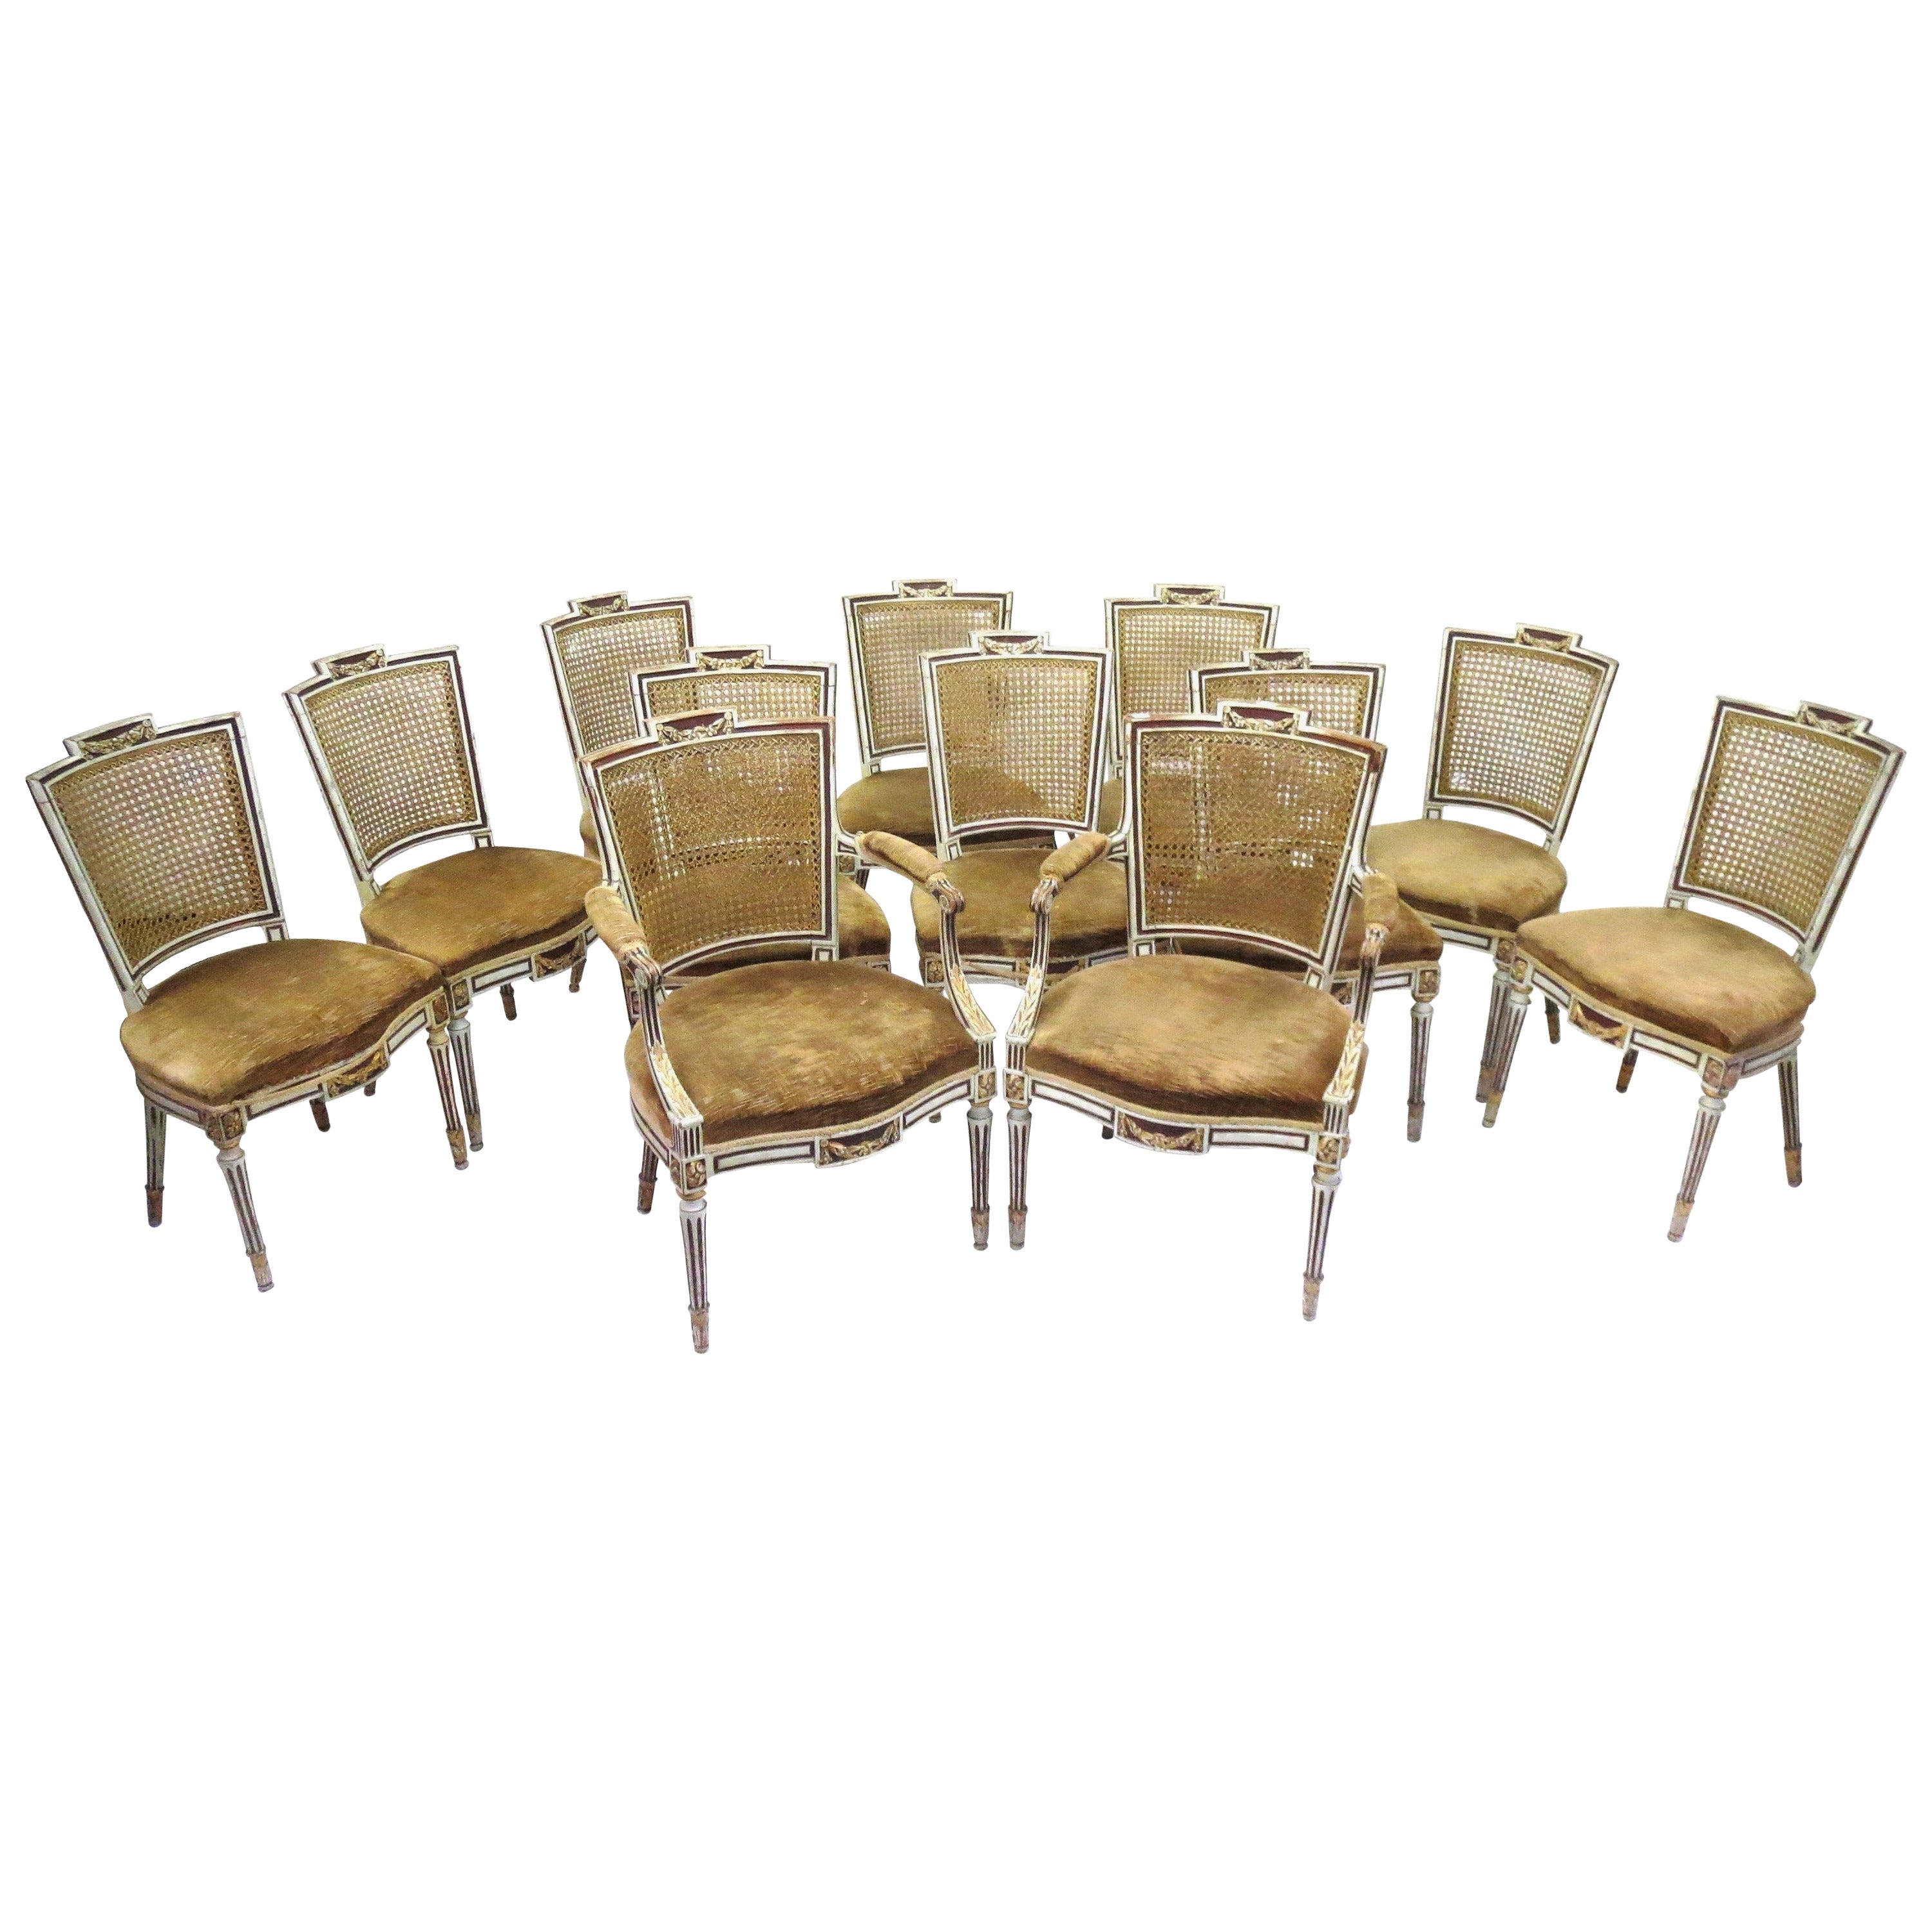 19th century Italian Set of twelve Dining Chairs in the Style of Louis XVI